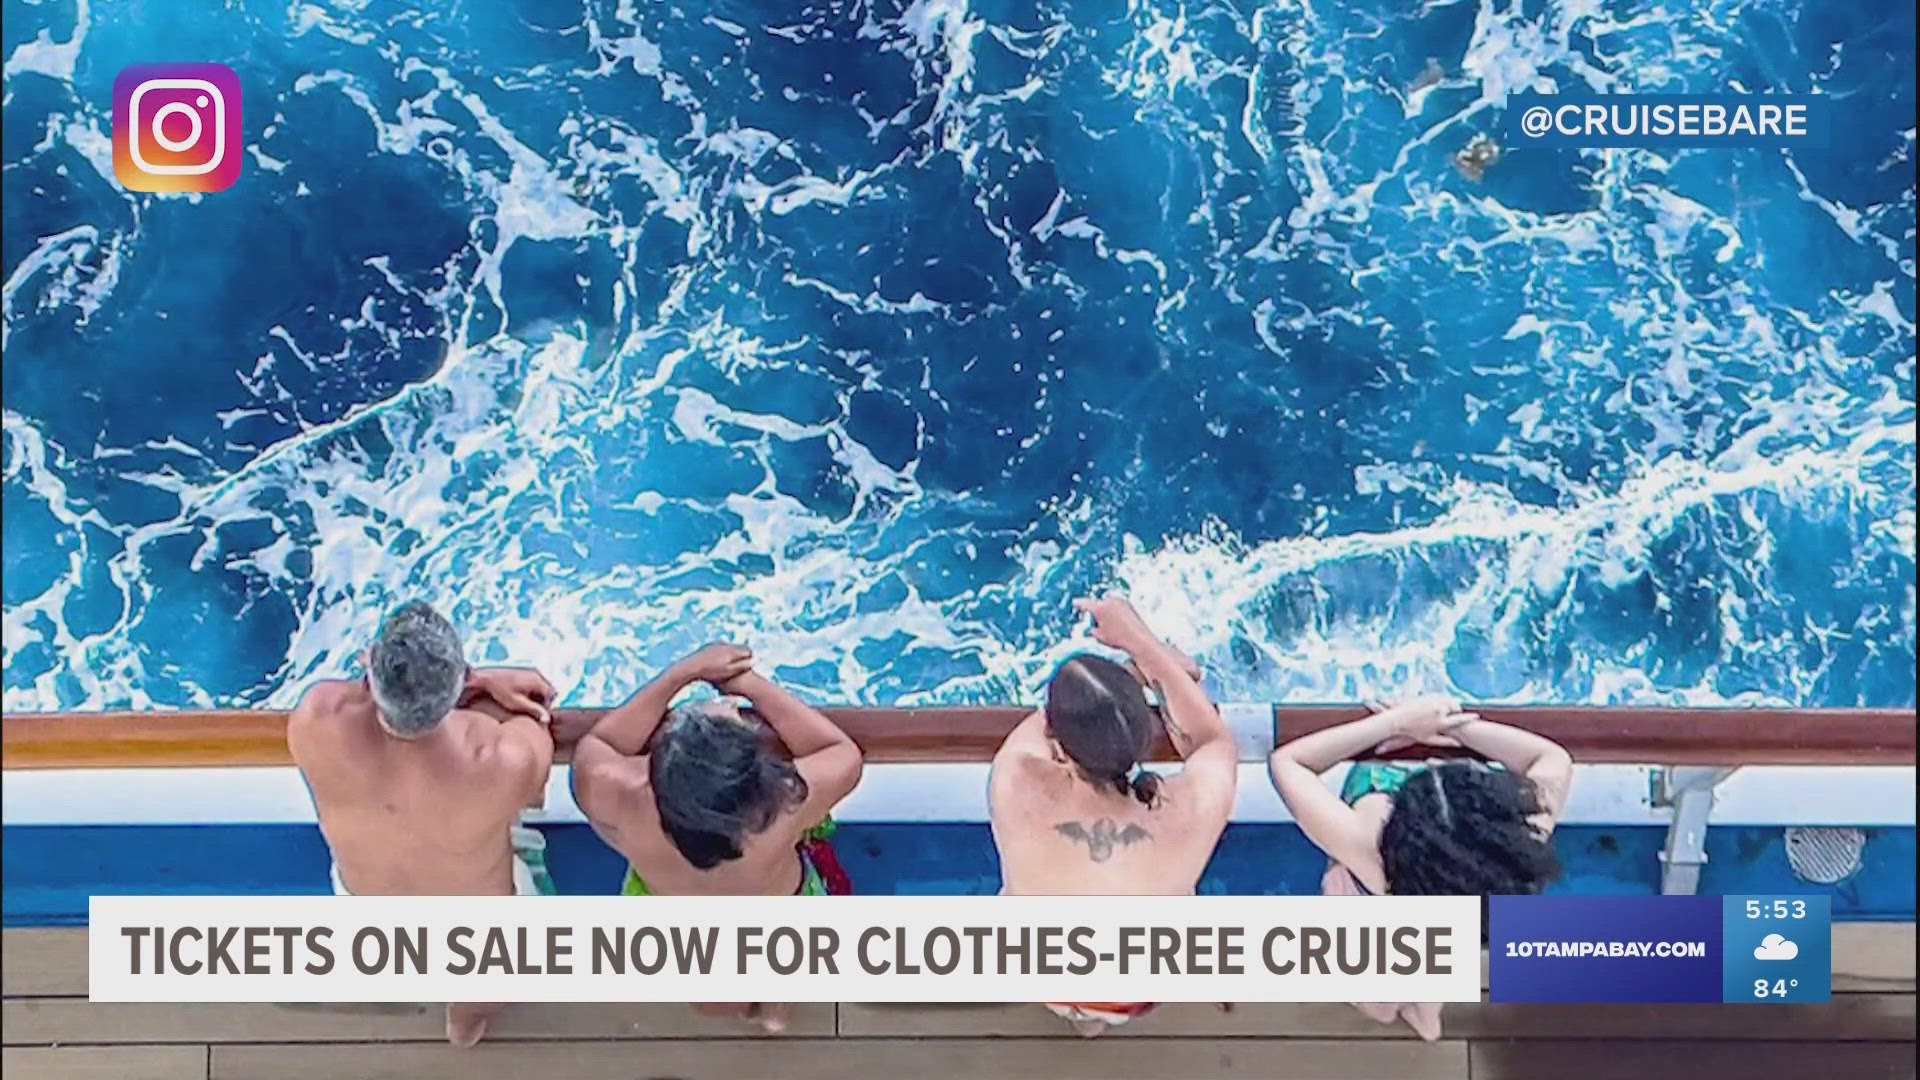 The cruise is set to venture to places in the Caribbean including Puerto Rico and The Bahamas.